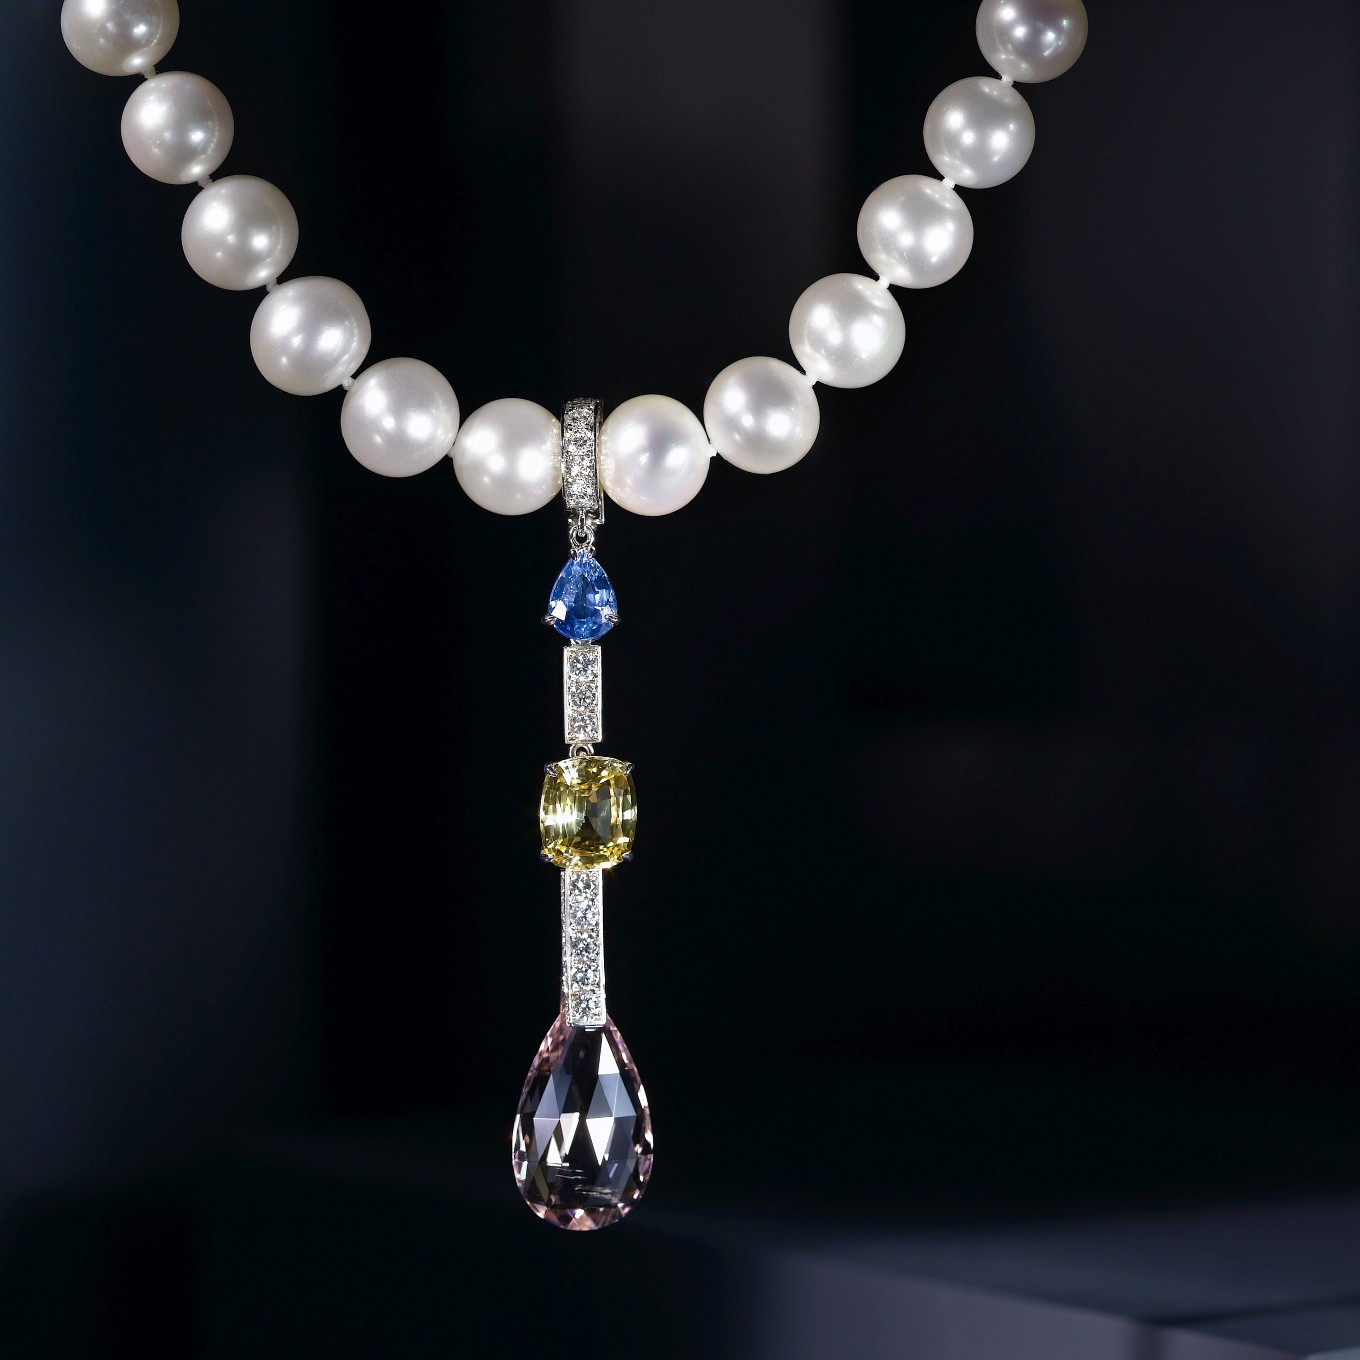 FRESHWATER PEARL NECKLACE. DETACHABLE DROP PENDANT WITH BLUE & YELLOW SAPPHIRE, MORGANITE & DIAMONDS